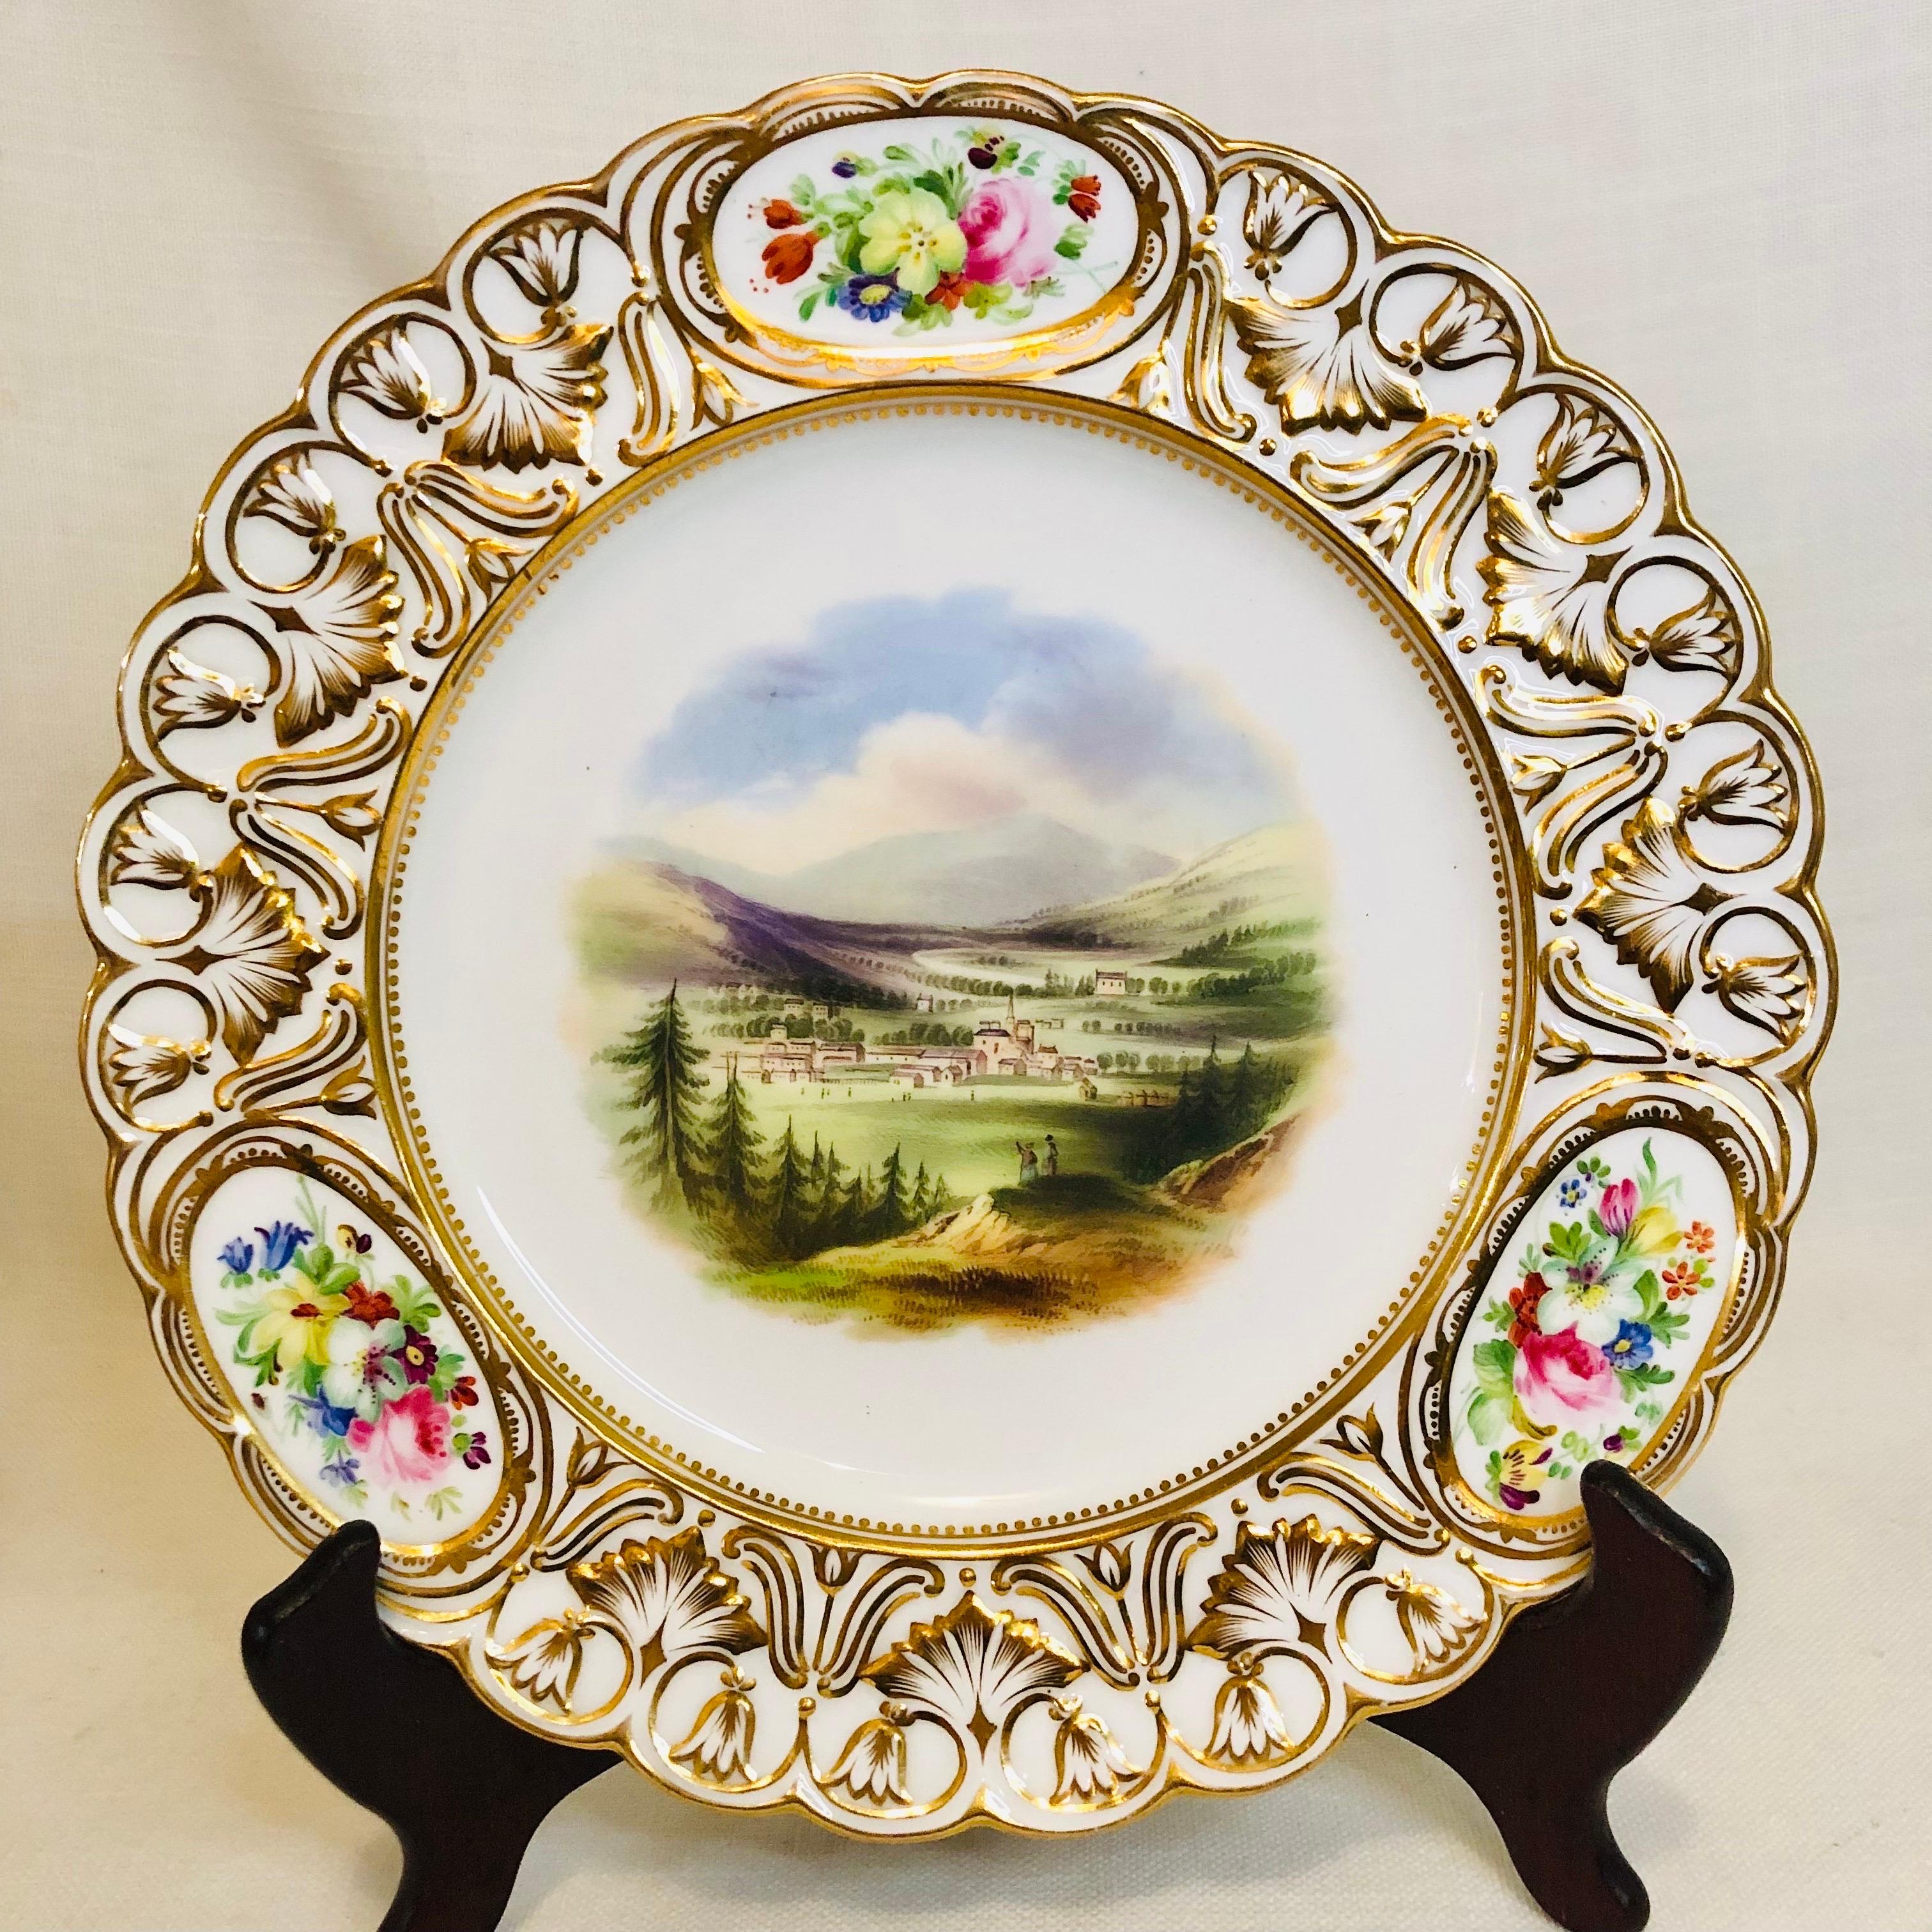 English Set of 16 19th Century Coalport Plates Each Hand-Painted with Magnificent Scenes For Sale